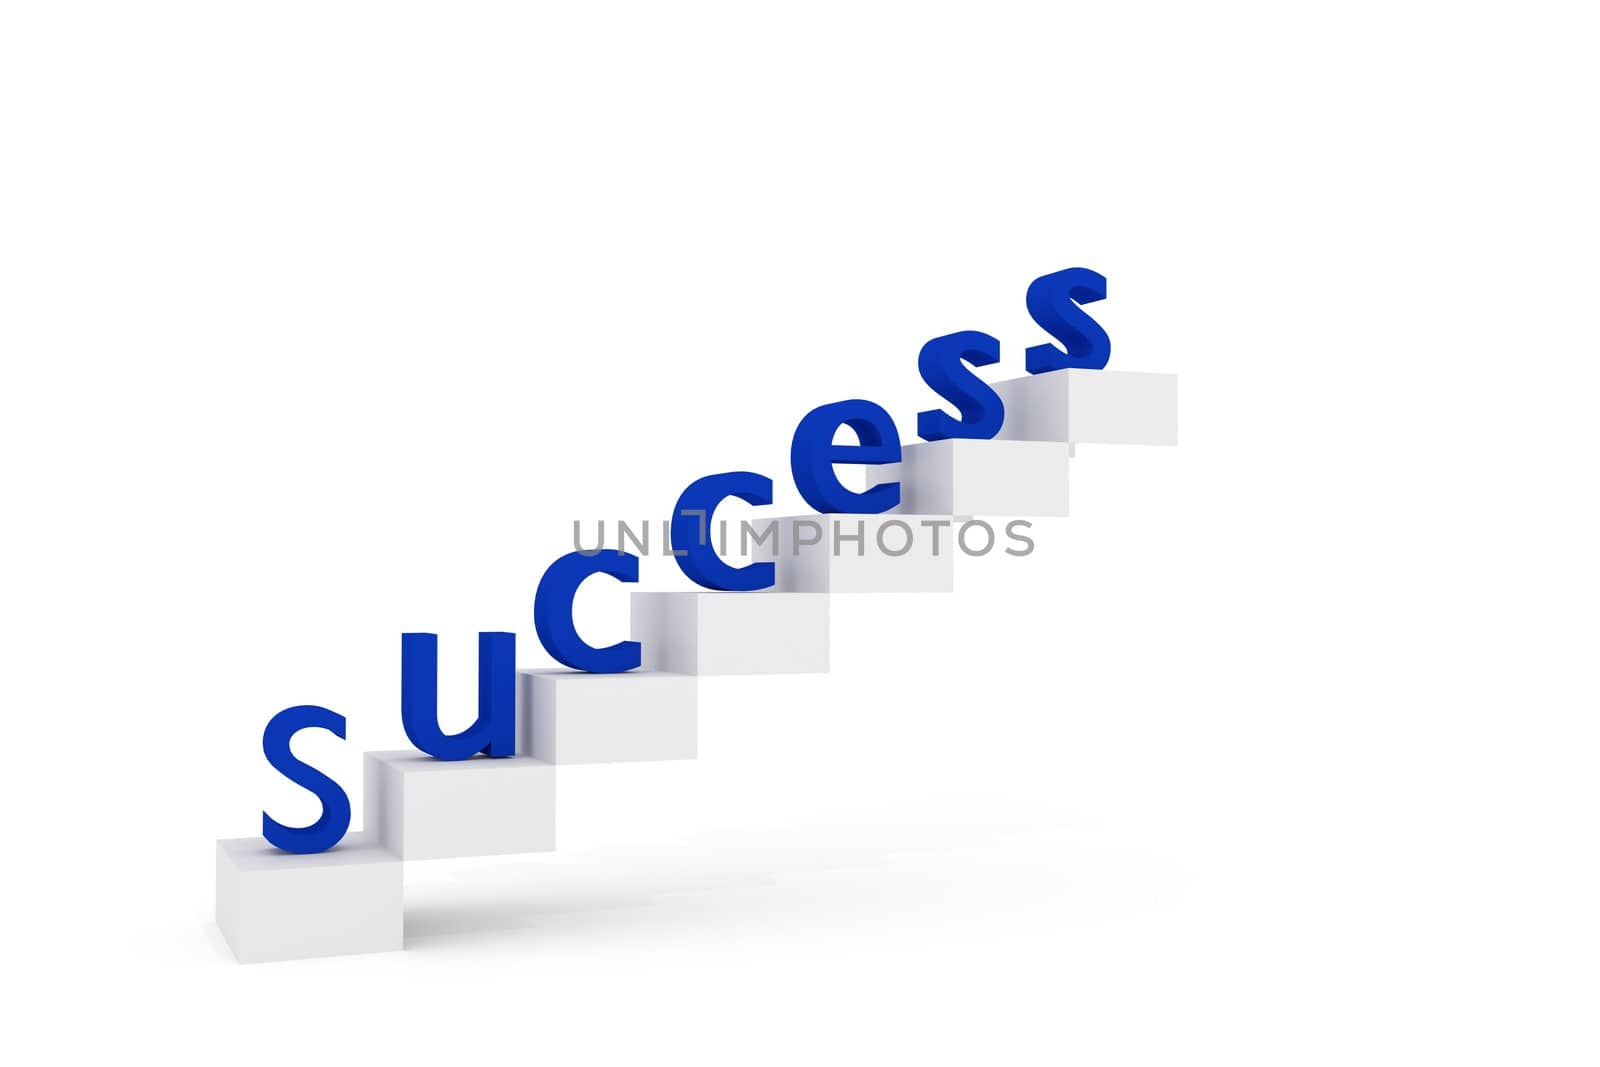 Blue Success on stairs 3D rendered illustration by abeckman2706